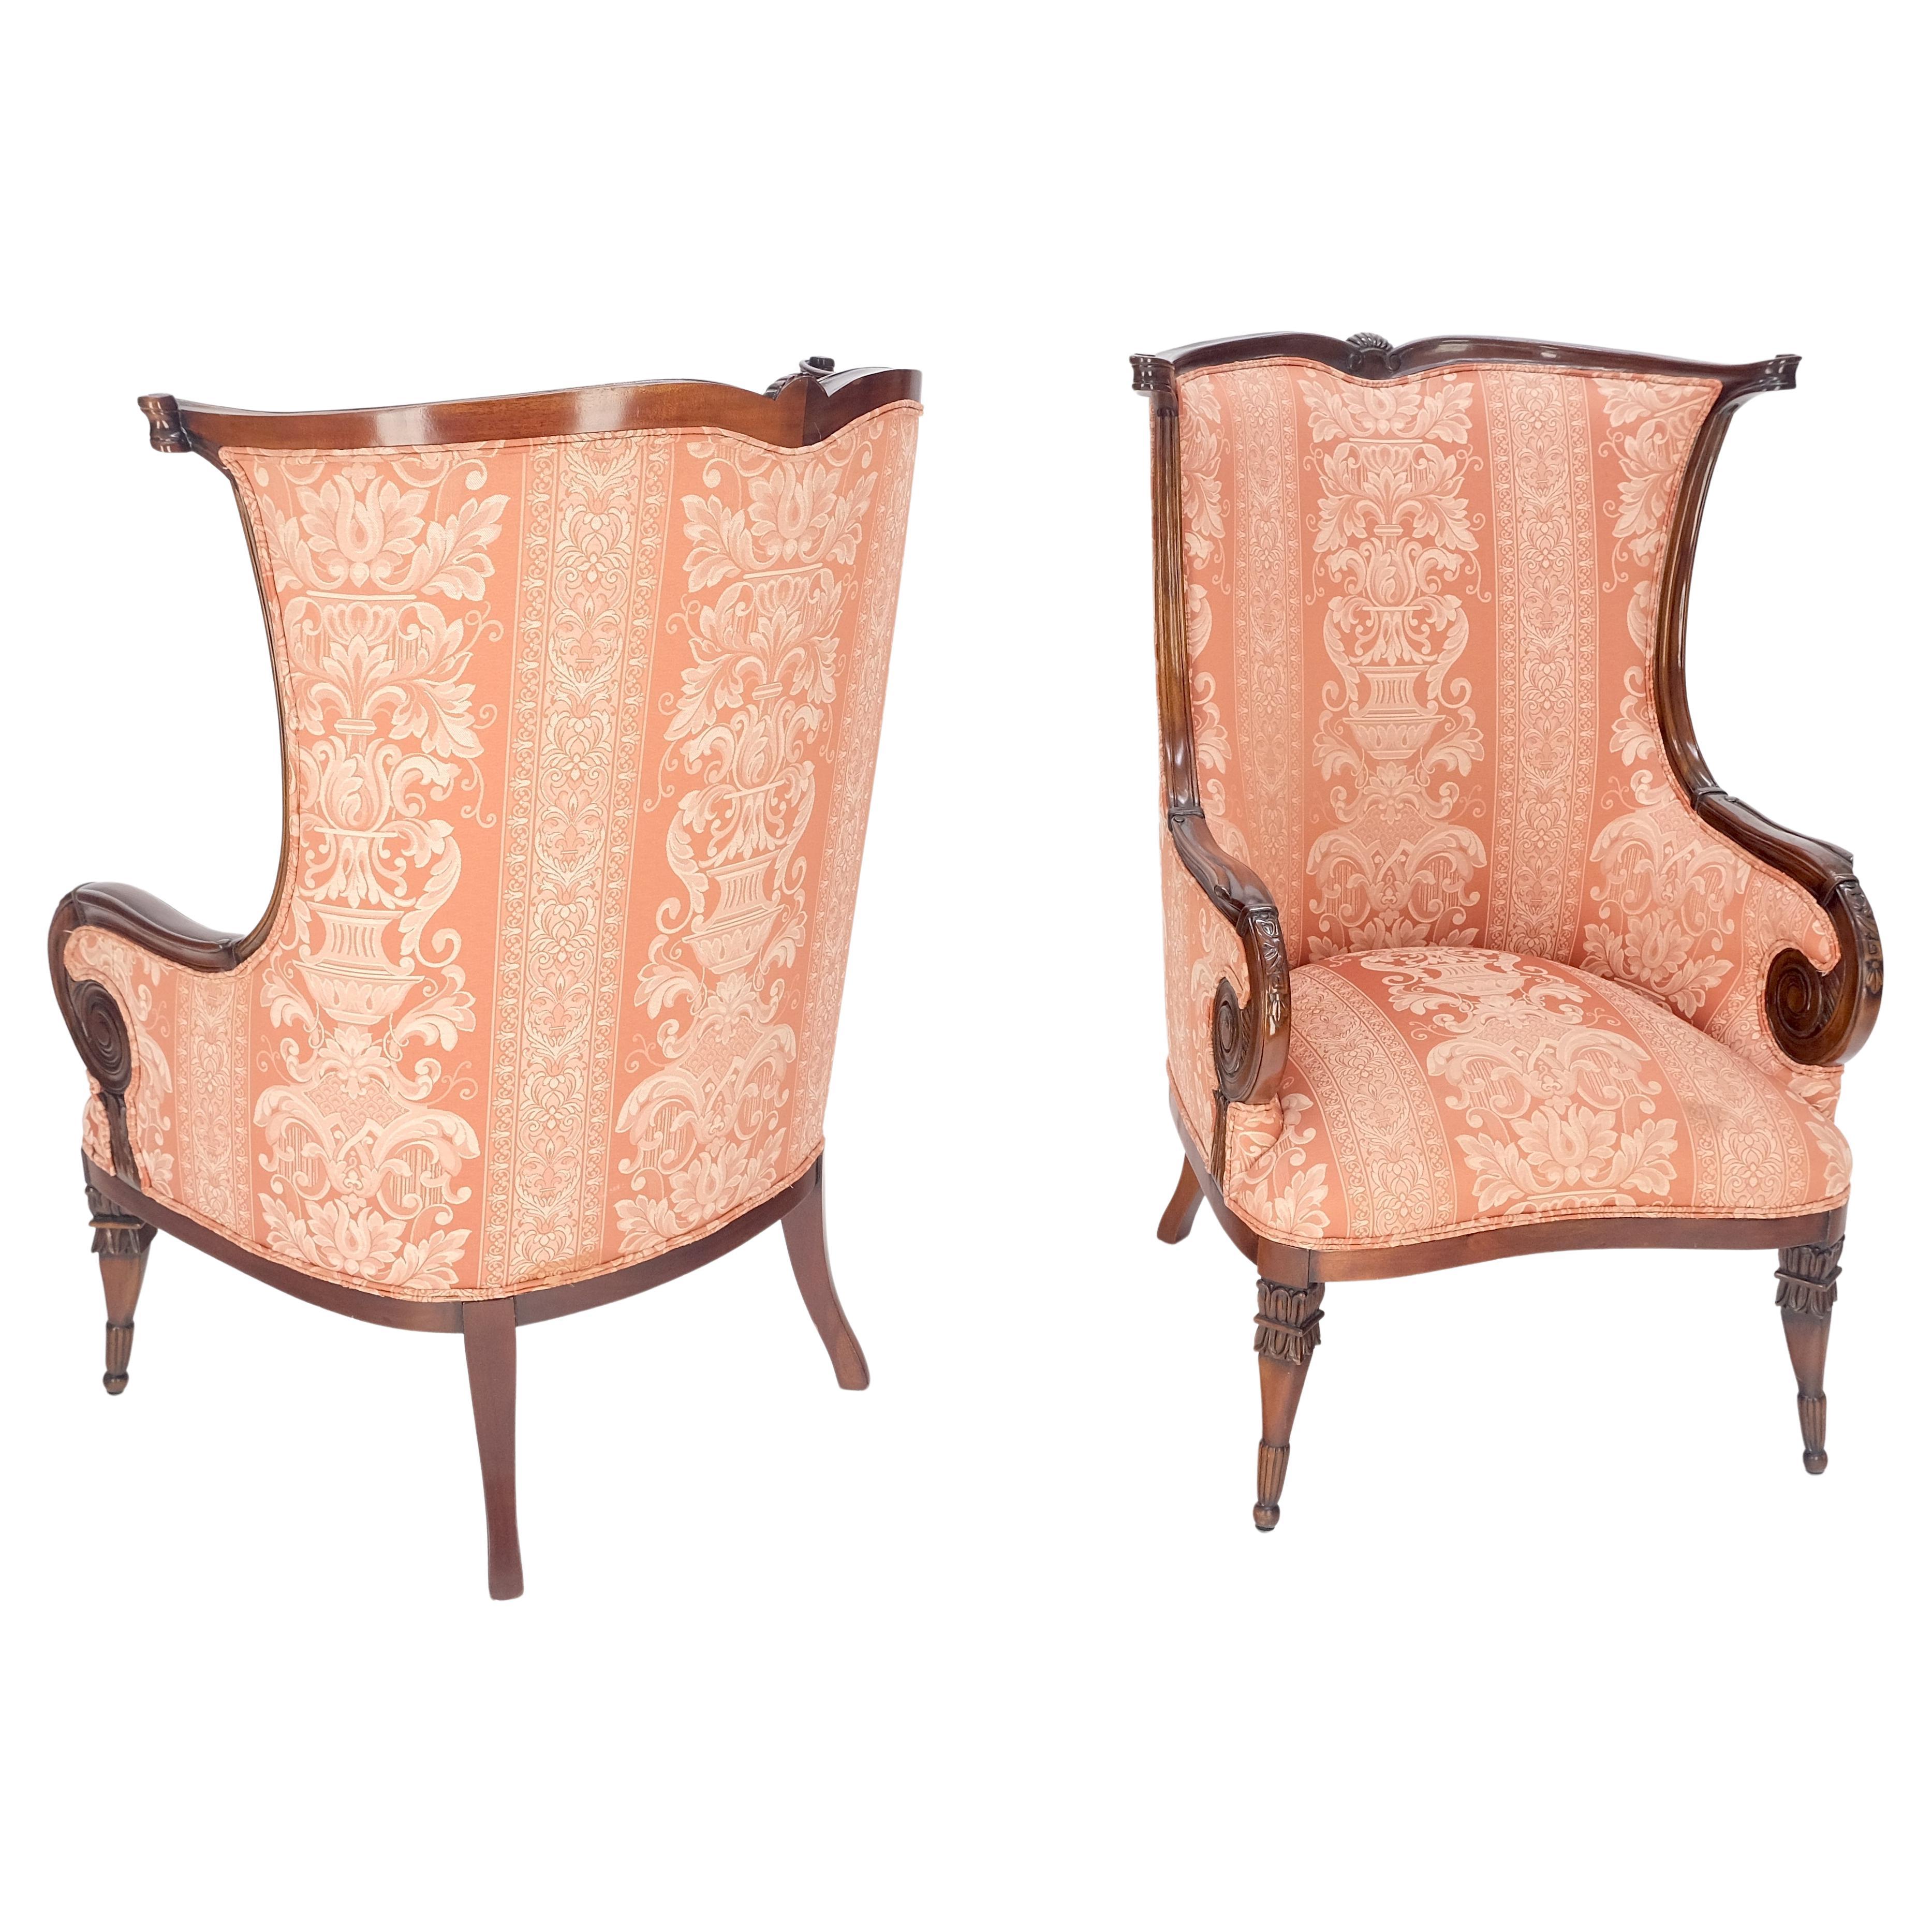 Pair of Fine Carved Mahogany Cream Silk Like Upholstery Regency Fire Side Chairs For Sale